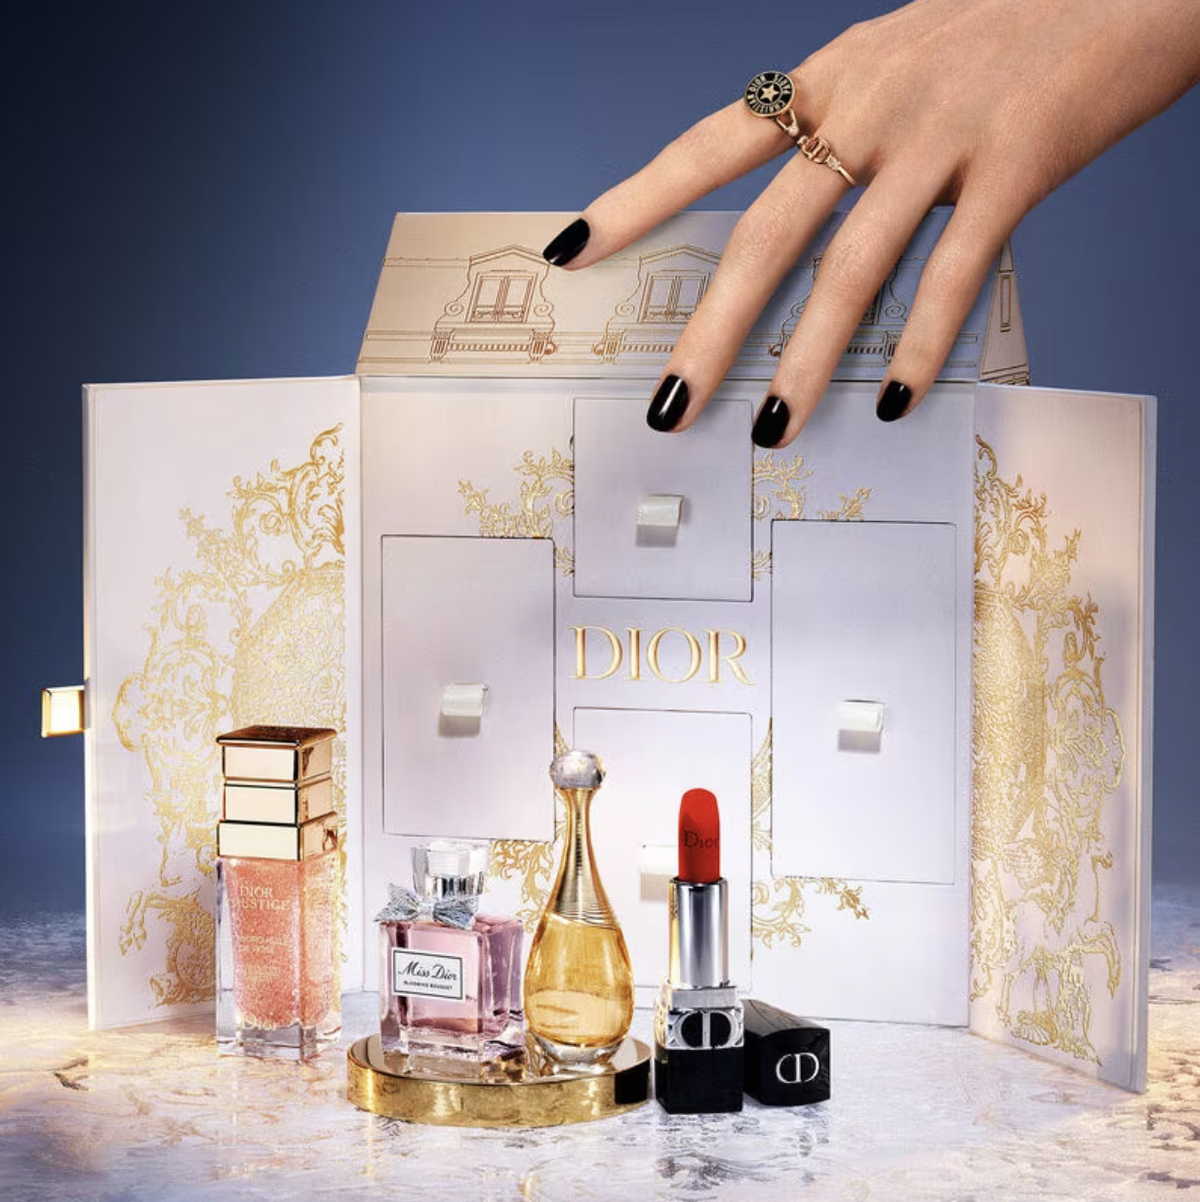 DIOR US Beauty: Luxury Fragrances, Cosmetics, Skincare & Gifts